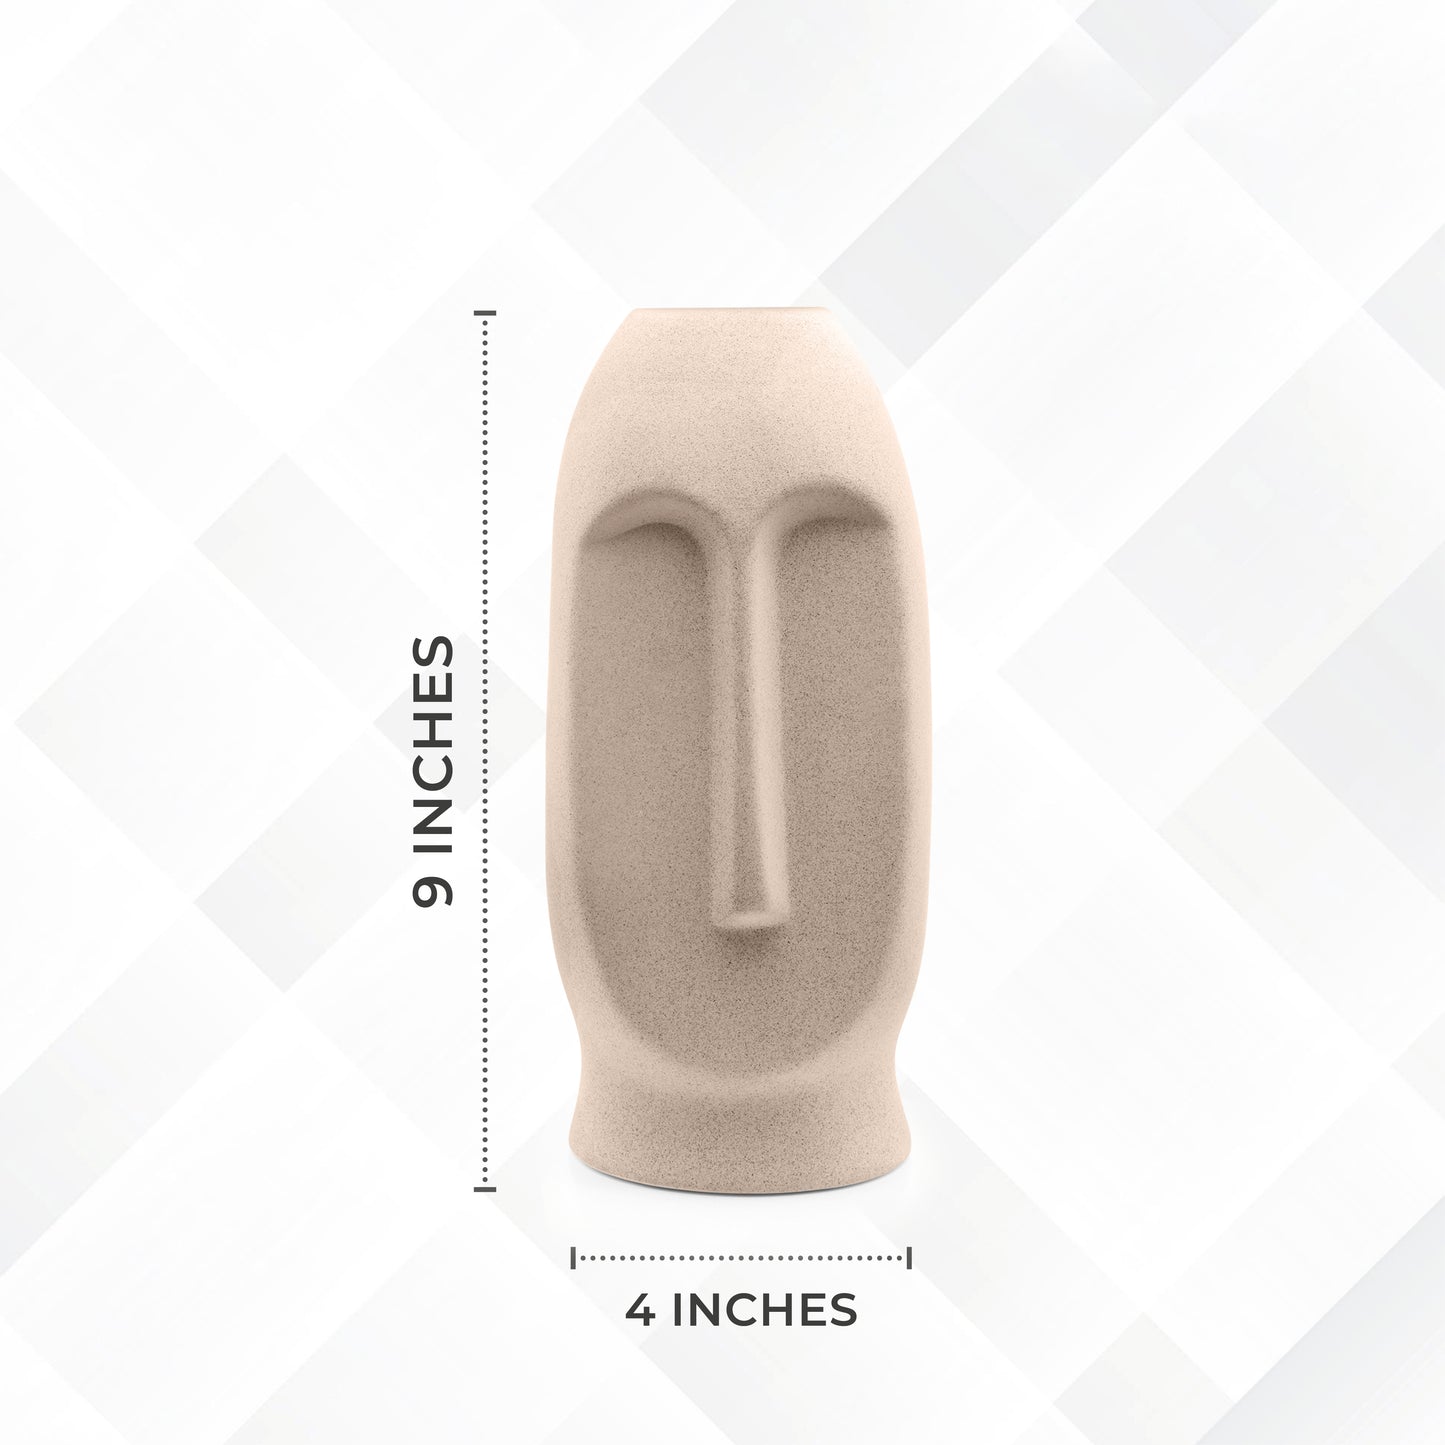 LuxeLane 'Face Vase' for Home Decor - Matte Beige, 9 inches, Pack of 1